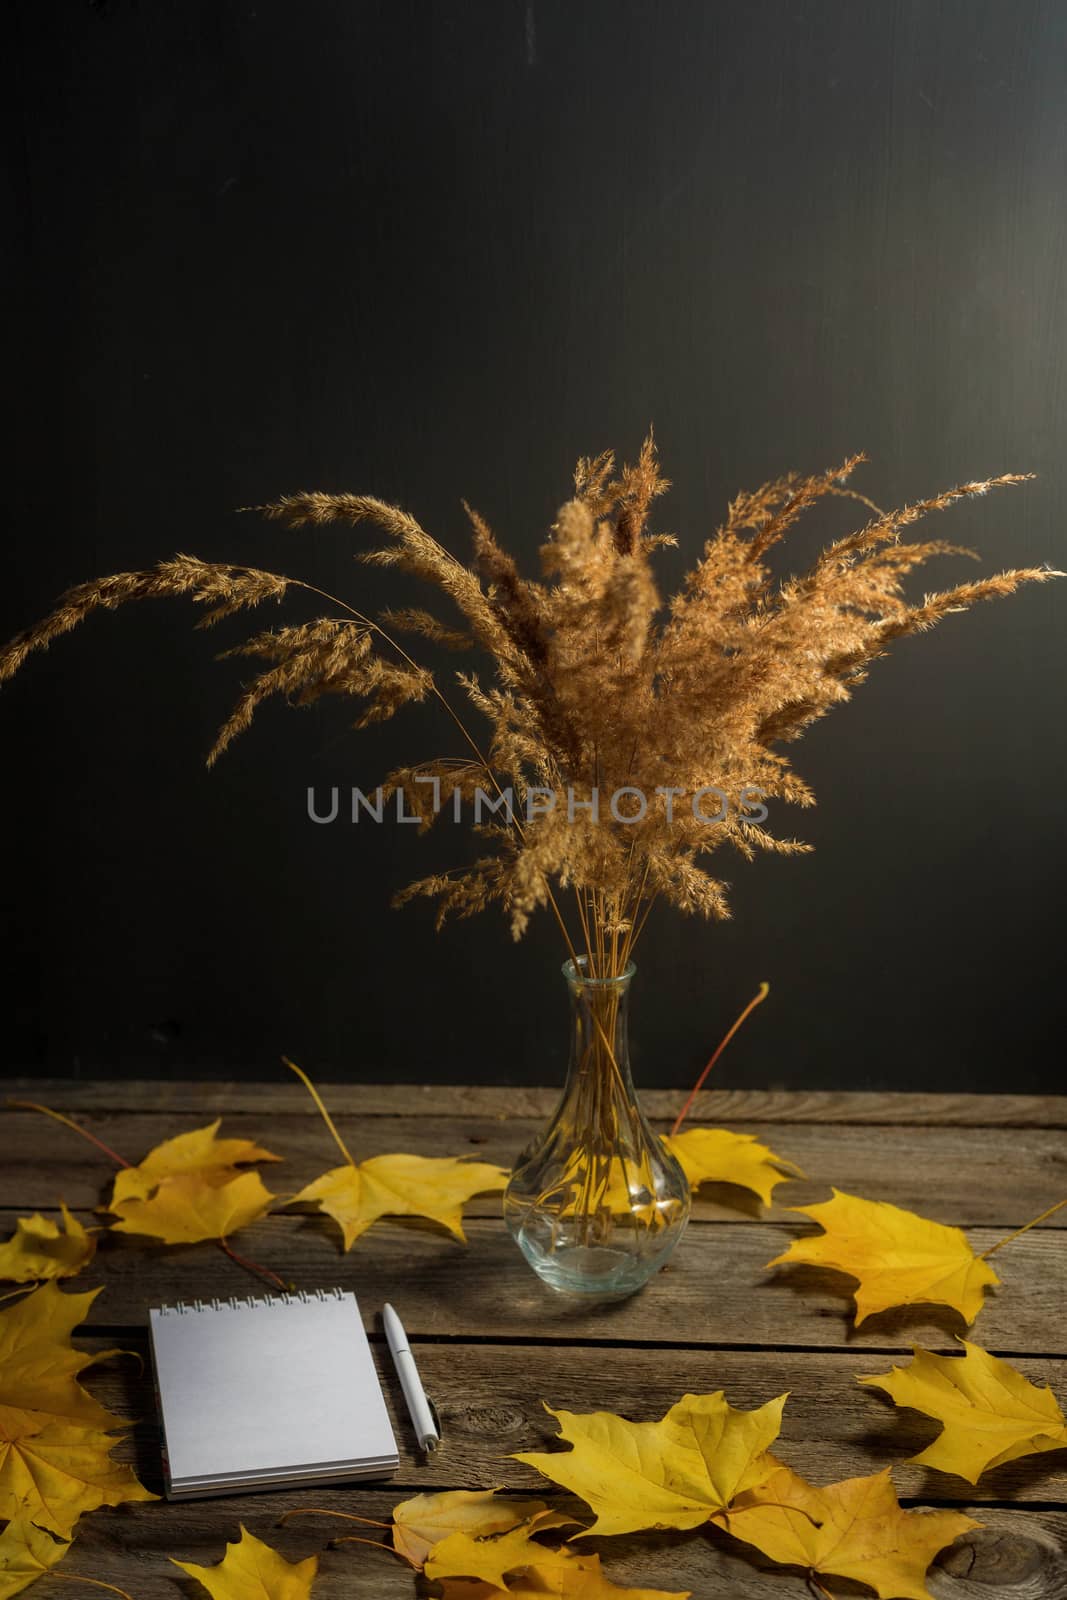 .Still life of autumn fallen leaves and office supplies on a wooden background by galinasharapova